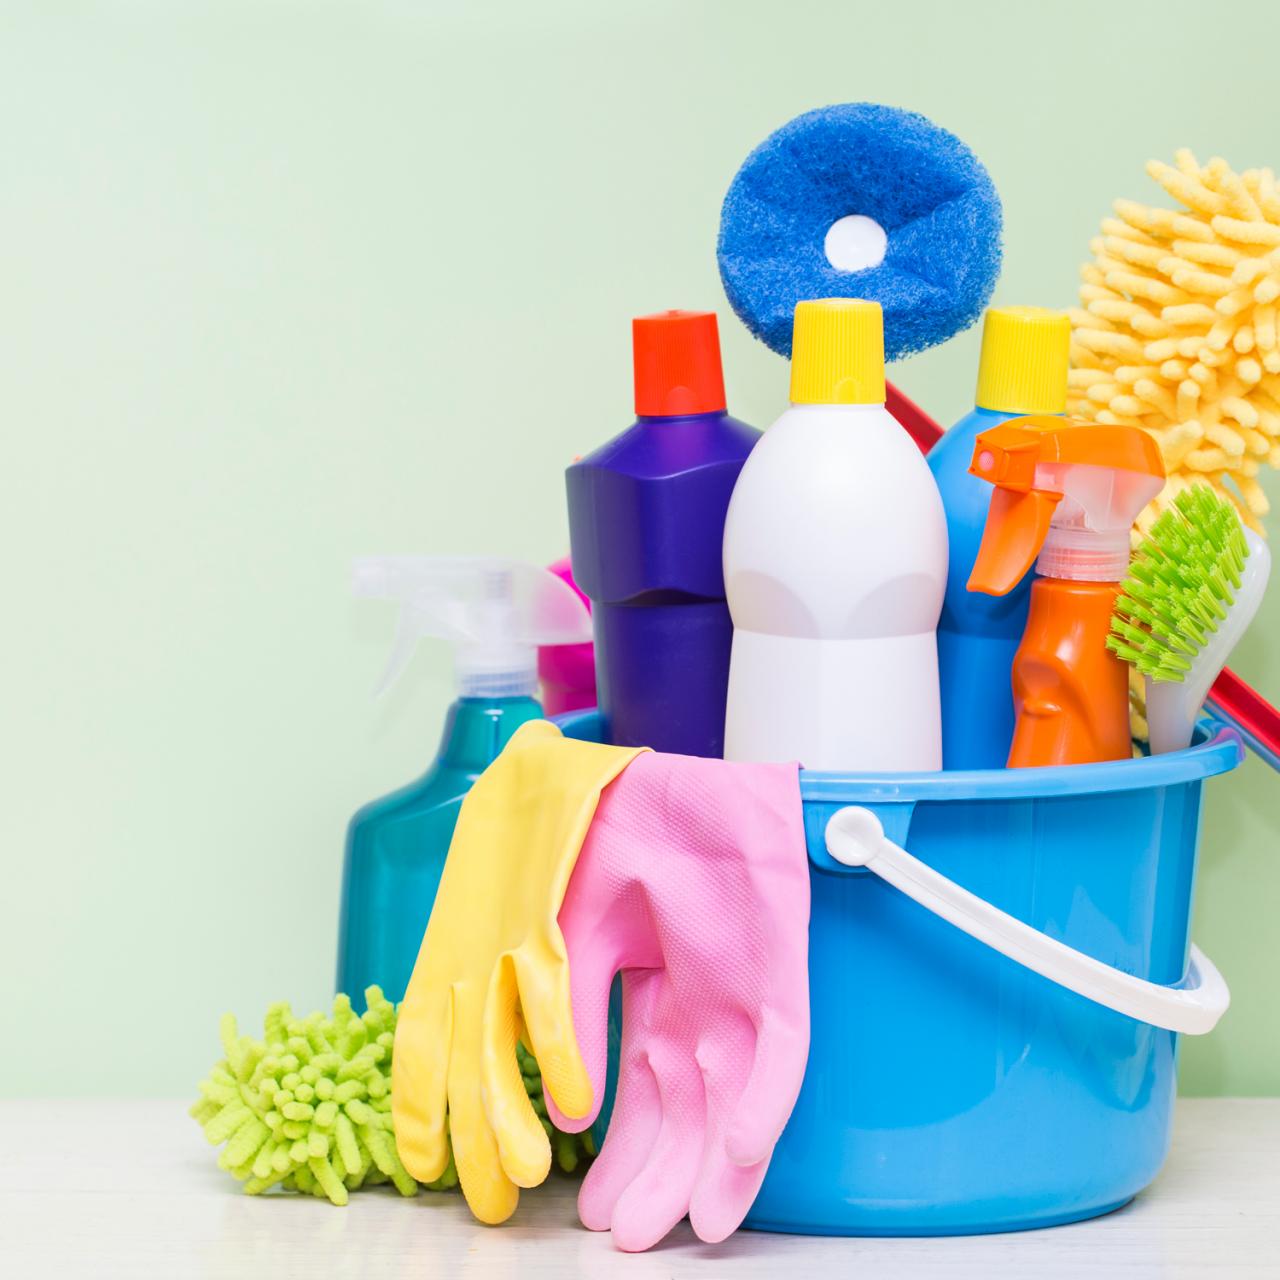 “Spotless Solutions: Effective Cleaning Supplies for Every Surface”